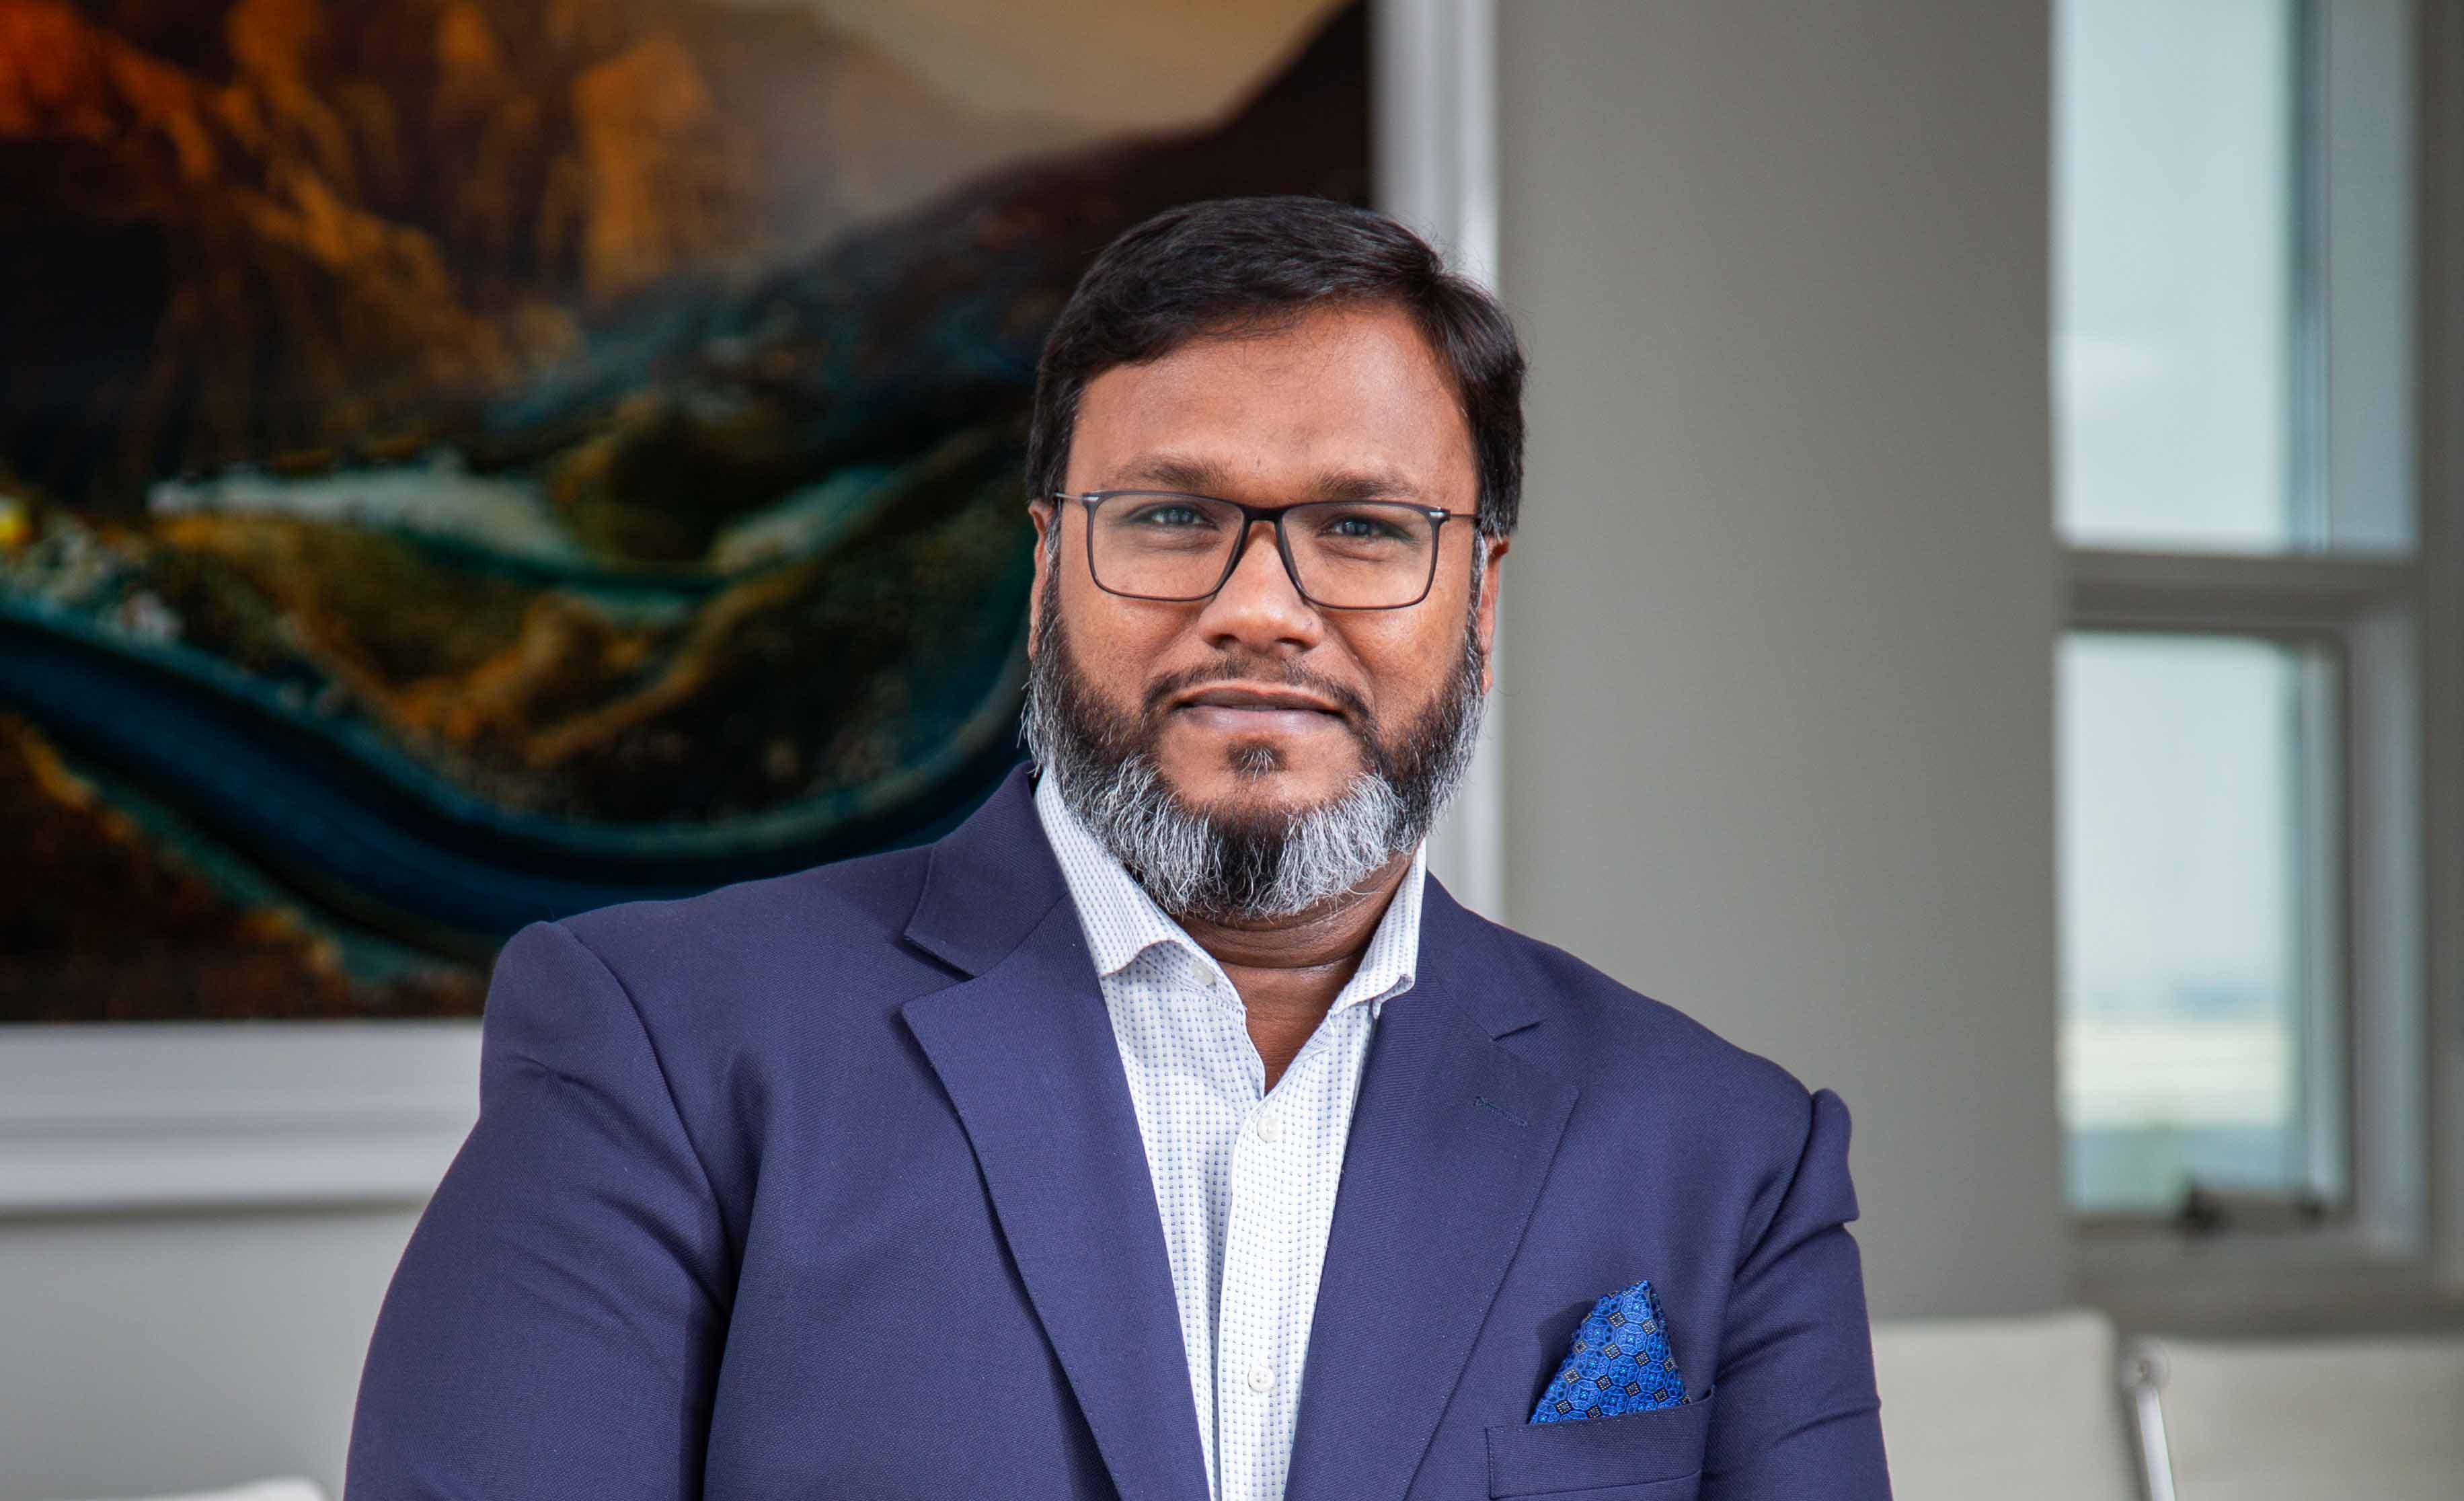 Benoy Kurien, the Group CEO of Al Hamra, among the 100 most influential construction leaders of 2022 in Construction Week's 13th annual Power 100 list